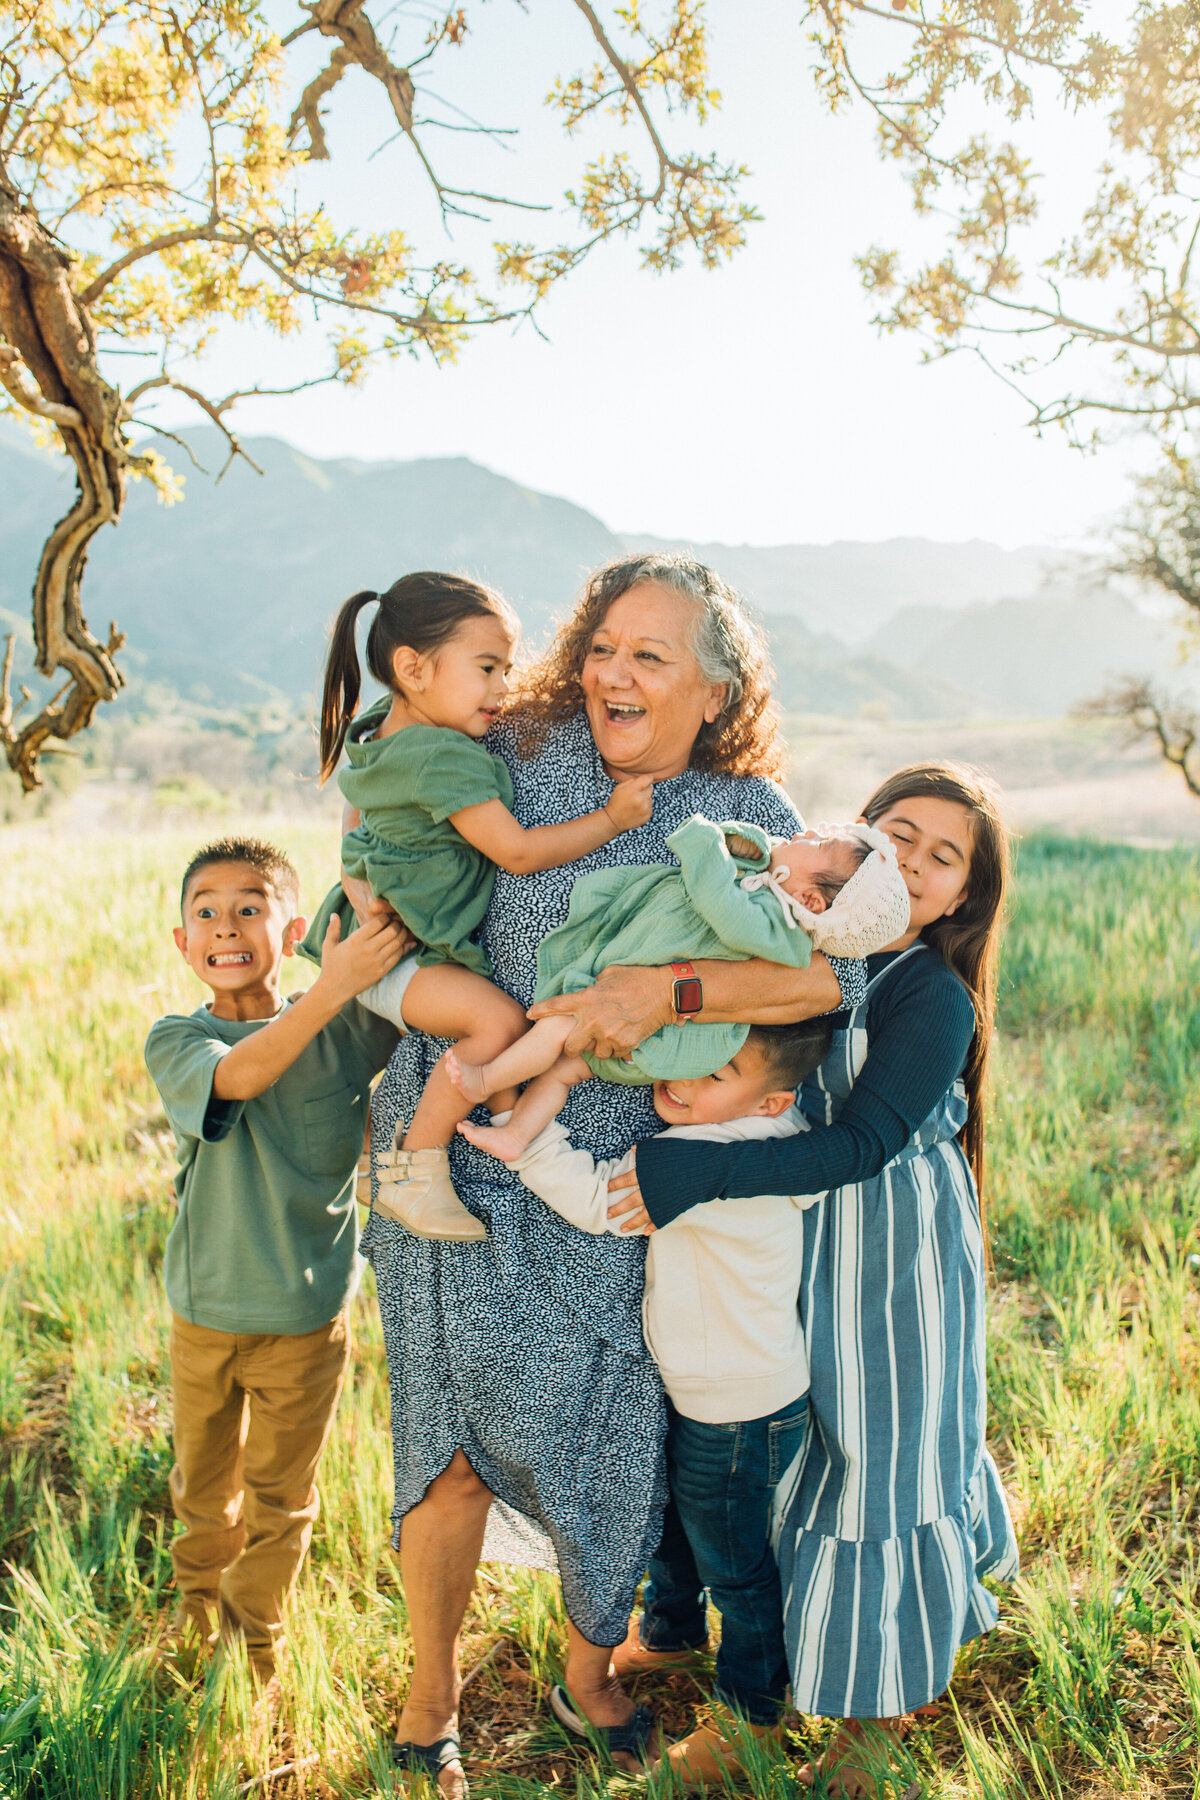 Family Portrait Photo Of Kids Hugging An Older Woman Los Angeles